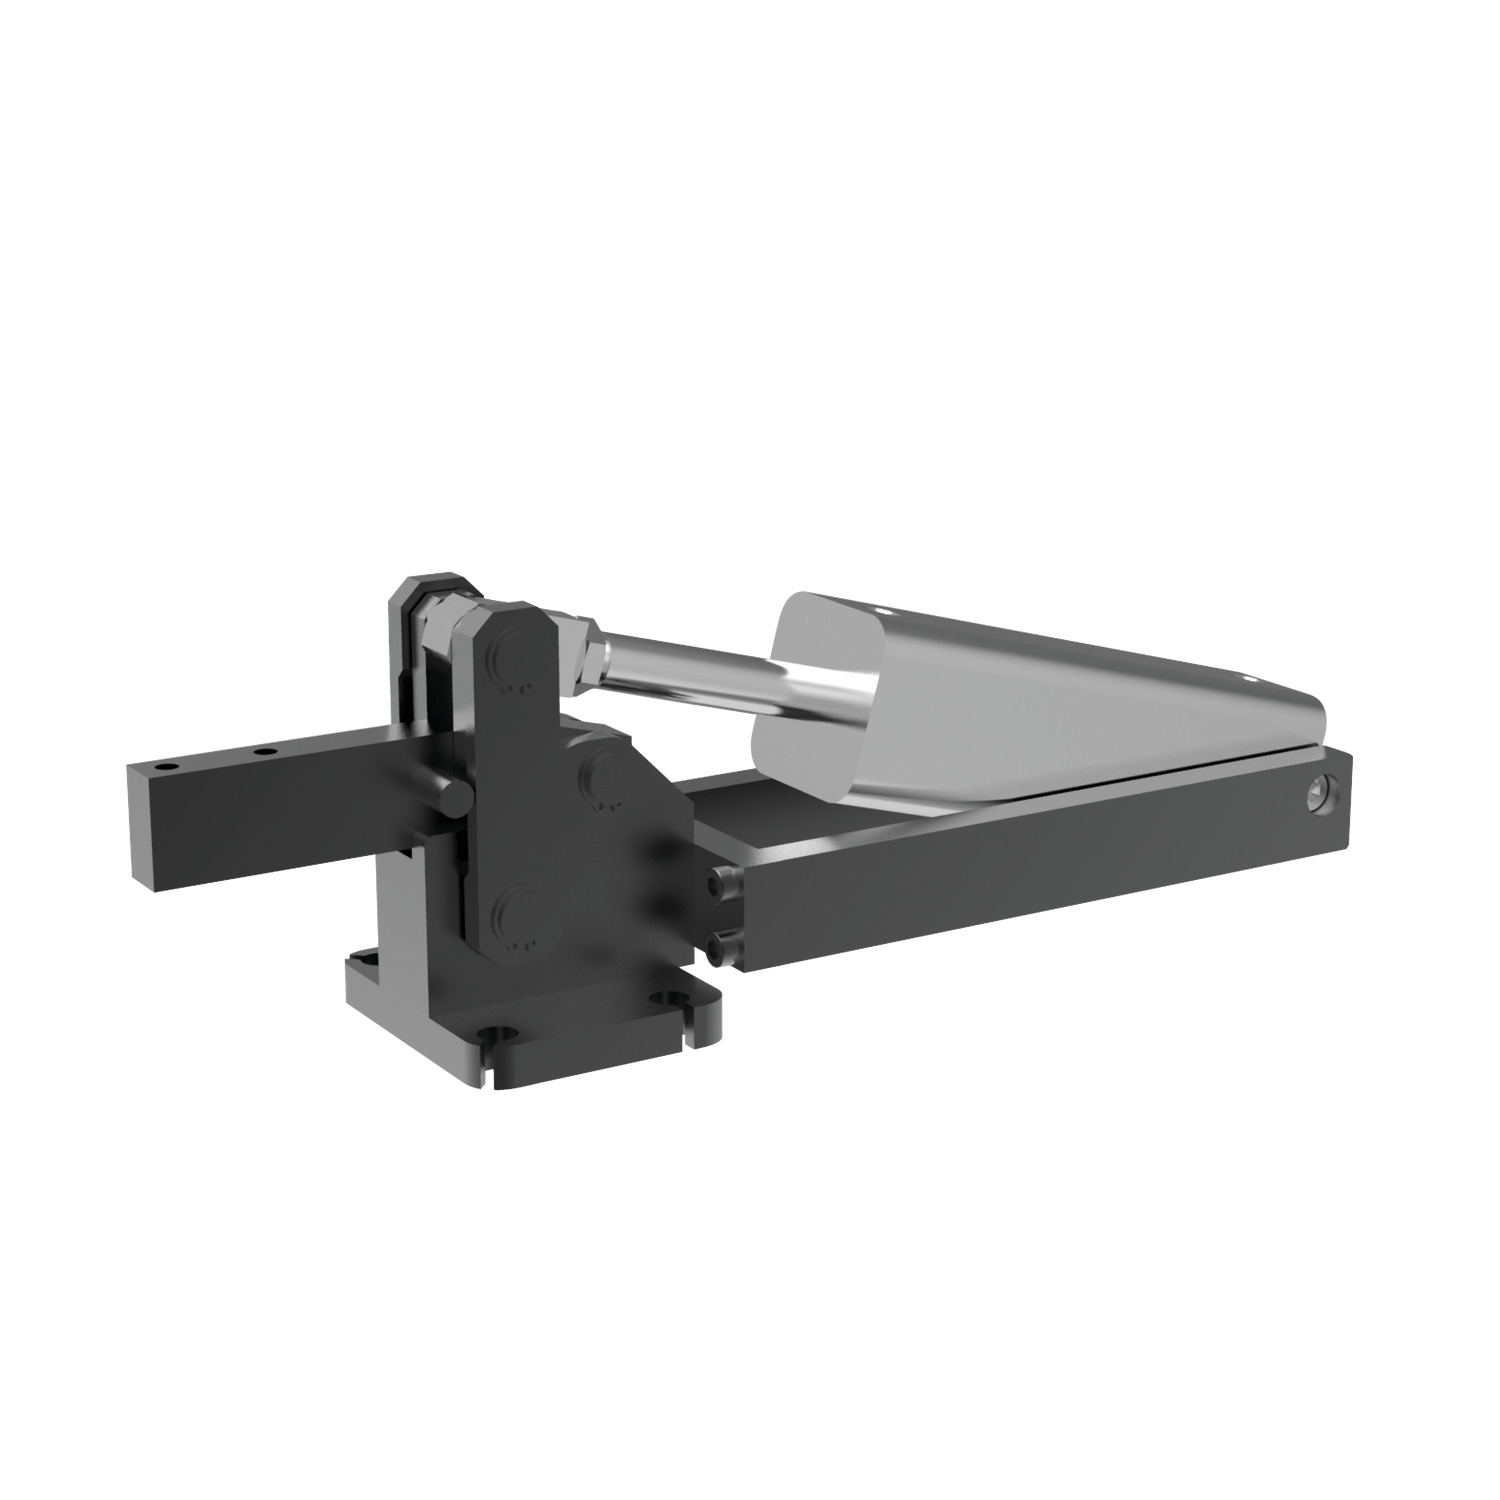 Pneumatic Heavy Duty Horizontal Cylinder Mount Heavy duty horizontal pneumatic toggle clamps are ideal for installation in material handling lines and special purpose machines.